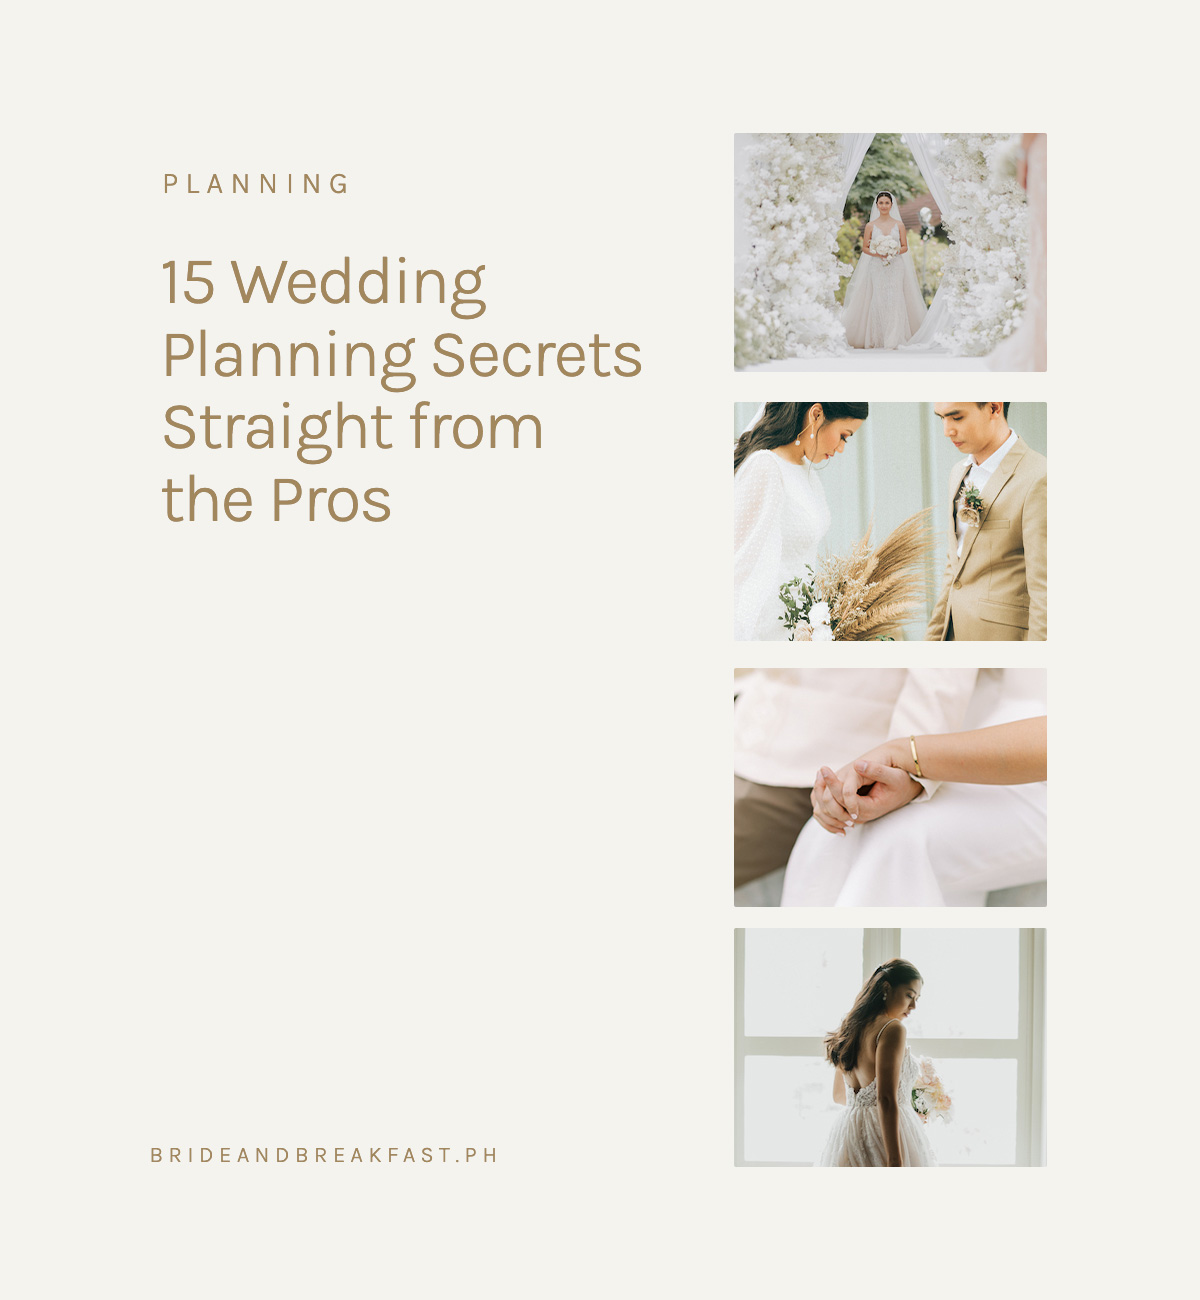 15 Wedding Planning Secrets Straight from the Pros